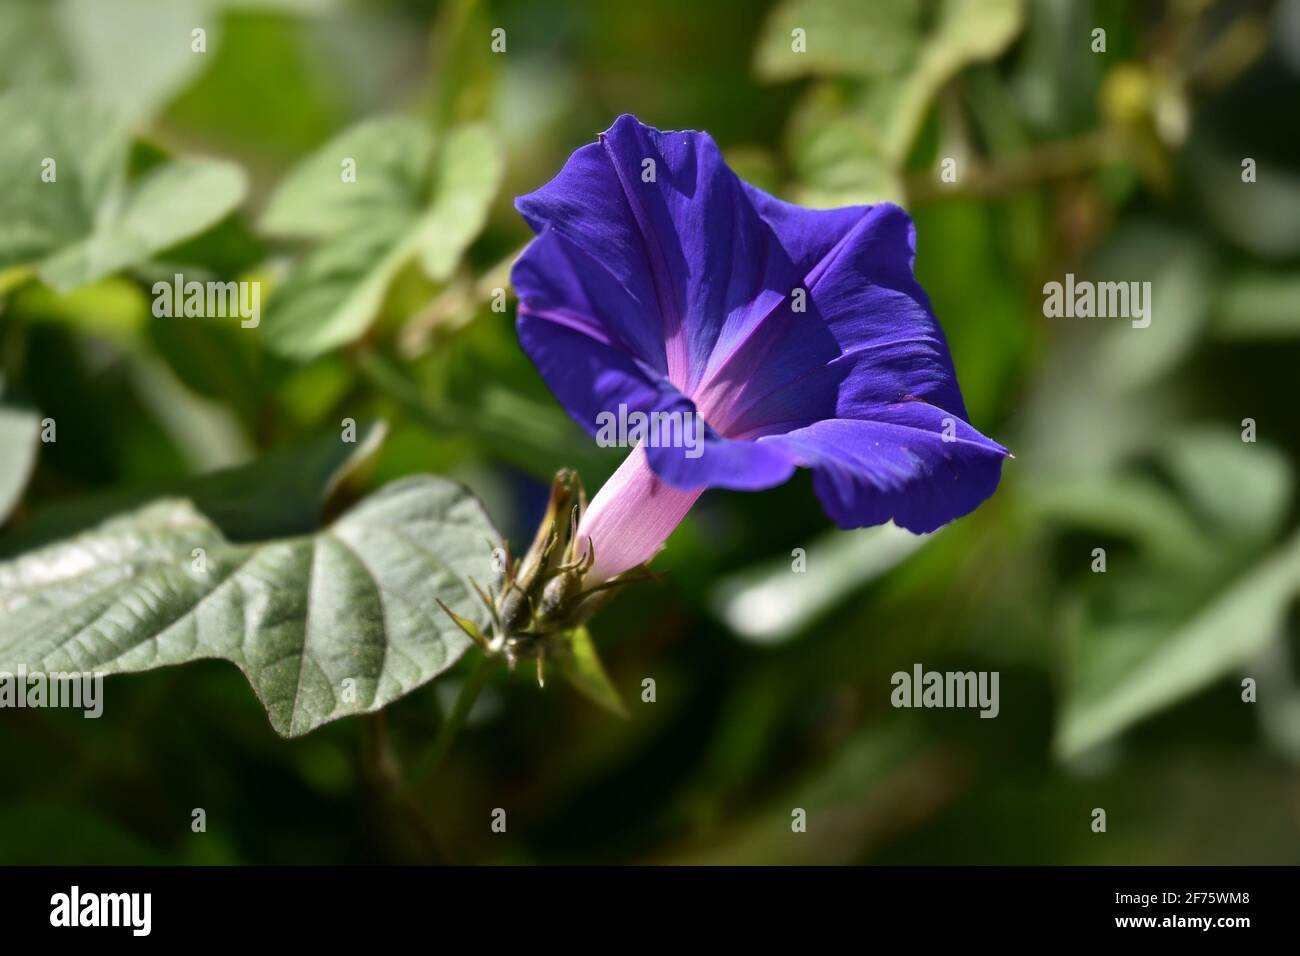 Ipomoea indica (Blue morning glory) a tropical perennial vine with purple-blue funnel-shaped flowers and green petiolate leaves. Stock Photo